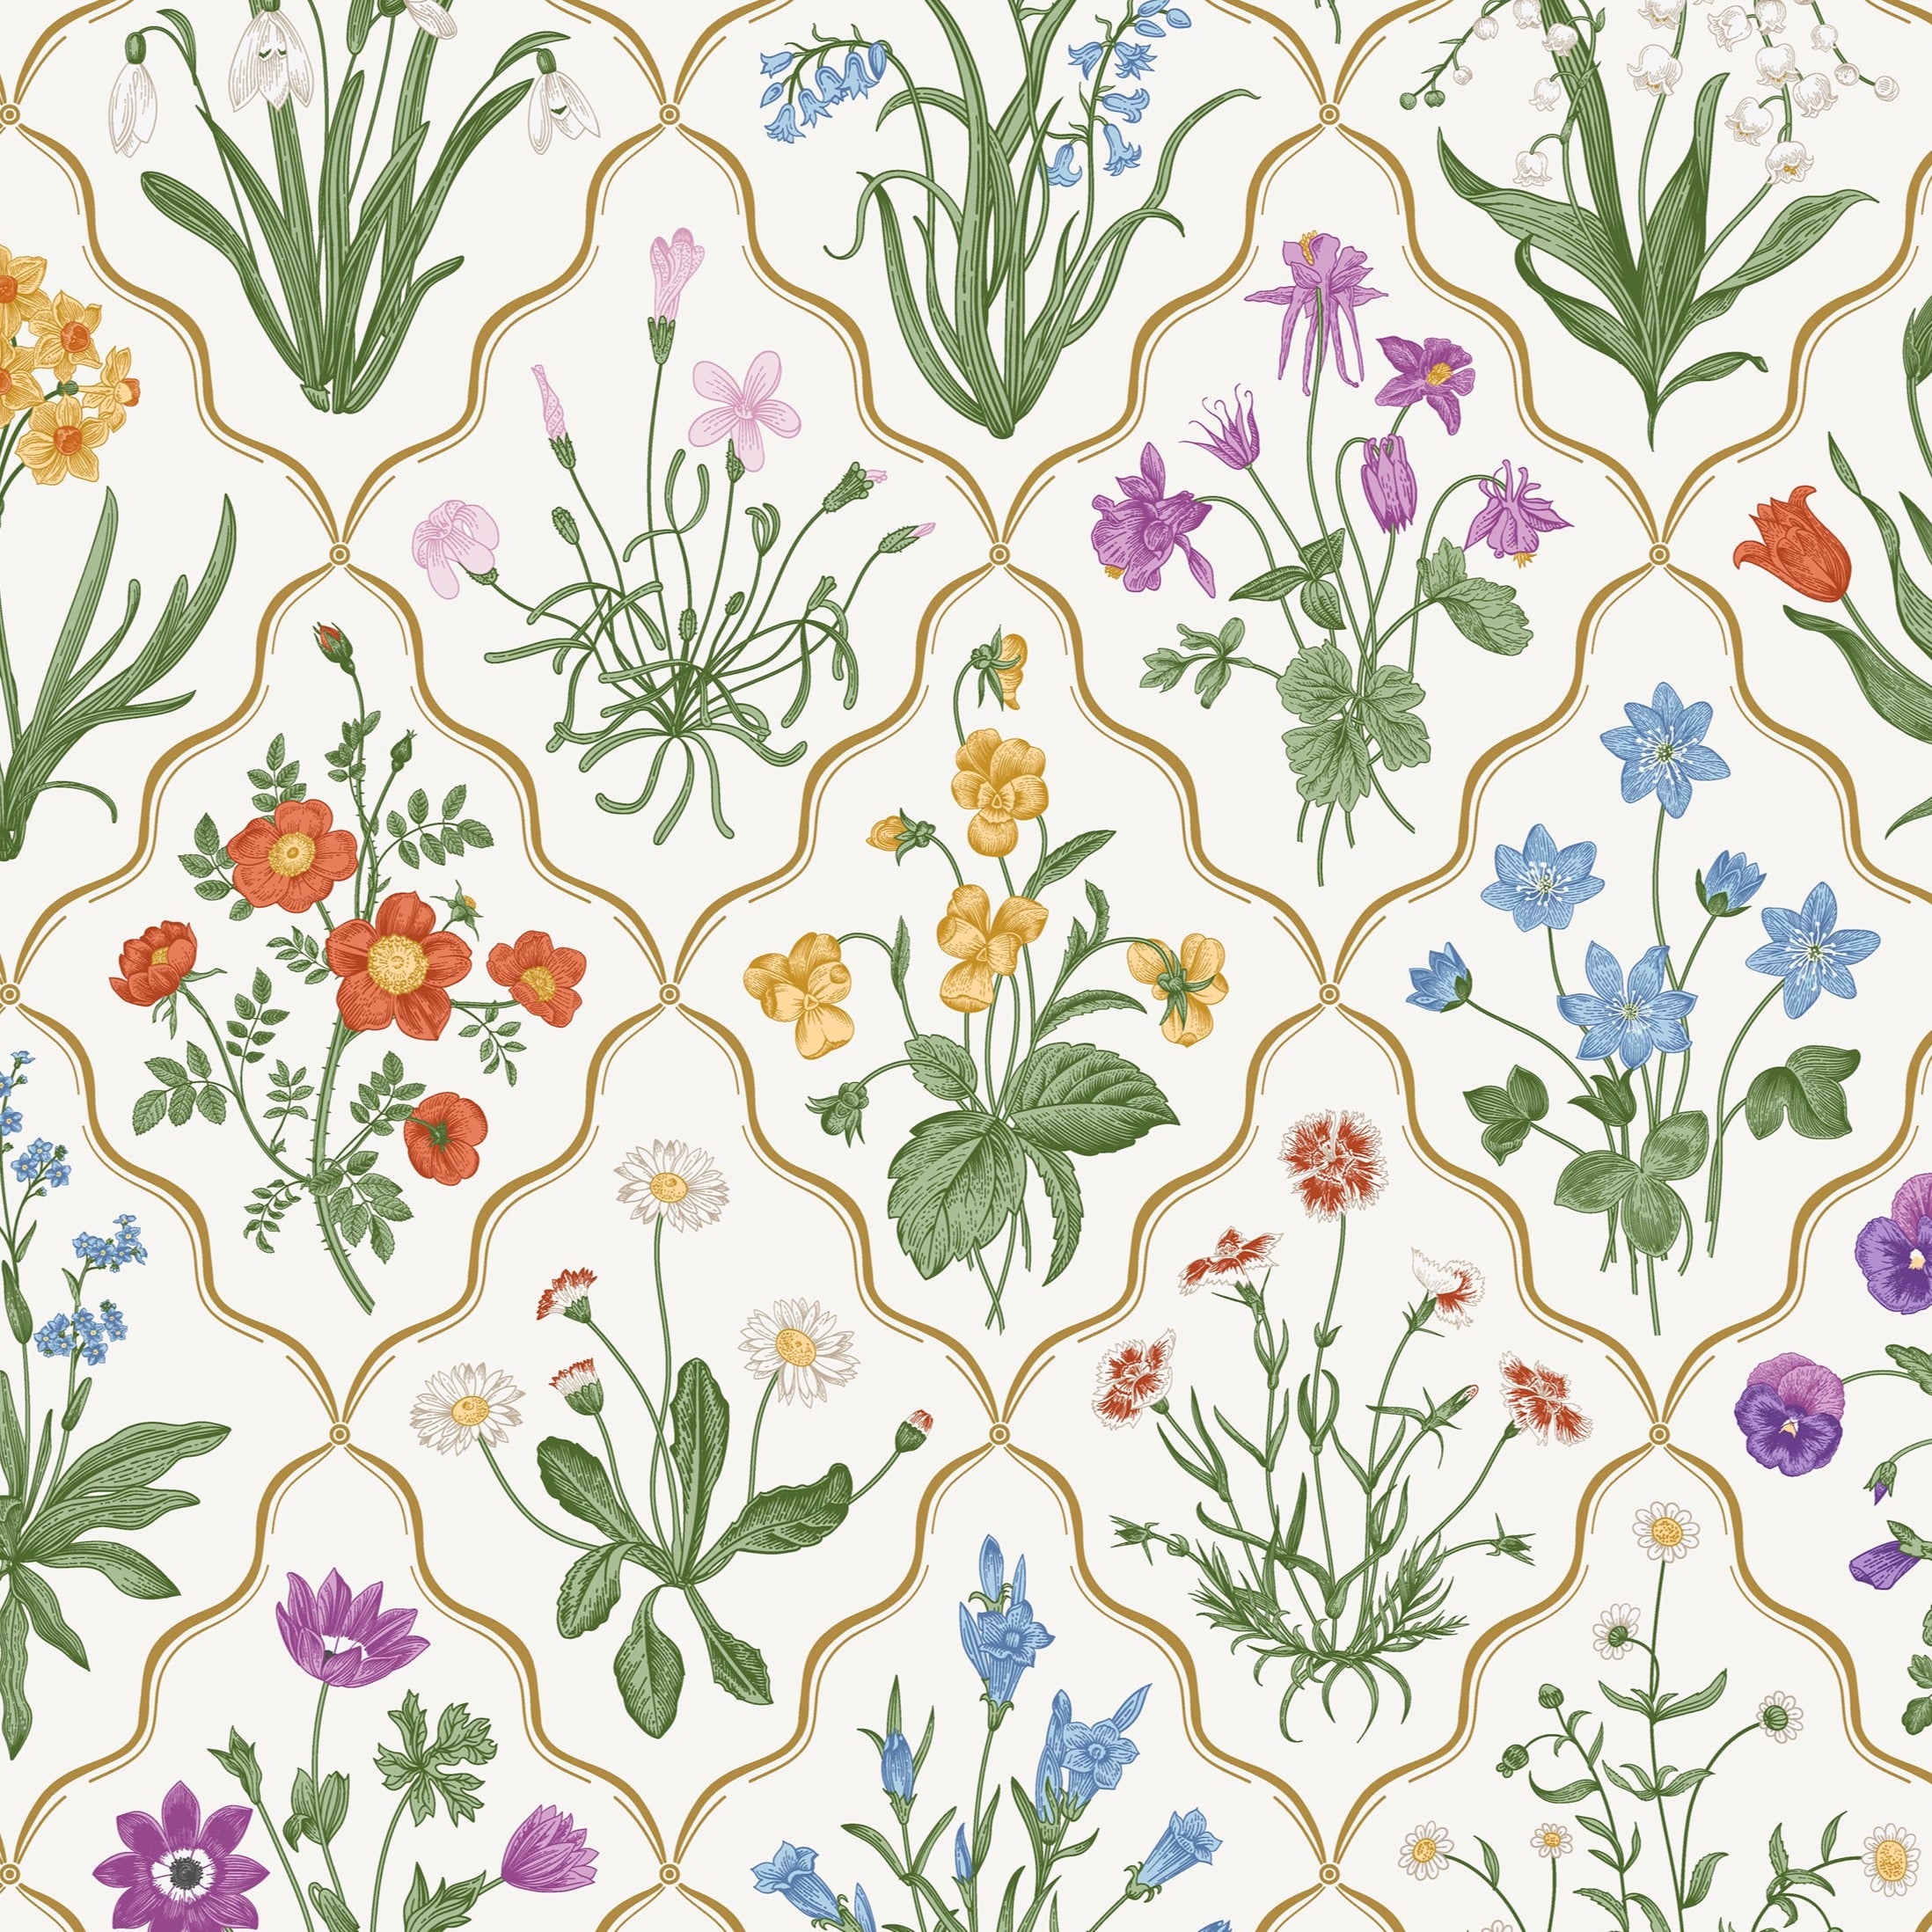 Close-up view of a wallpaper pattern displaying an intricate design of garden flowers arranged in a seamless, repeating pattern. Each segment of the pattern features unique flowers like red poppies, yellow daffodils, and purple irises, all interconnected by delicate green foliage.